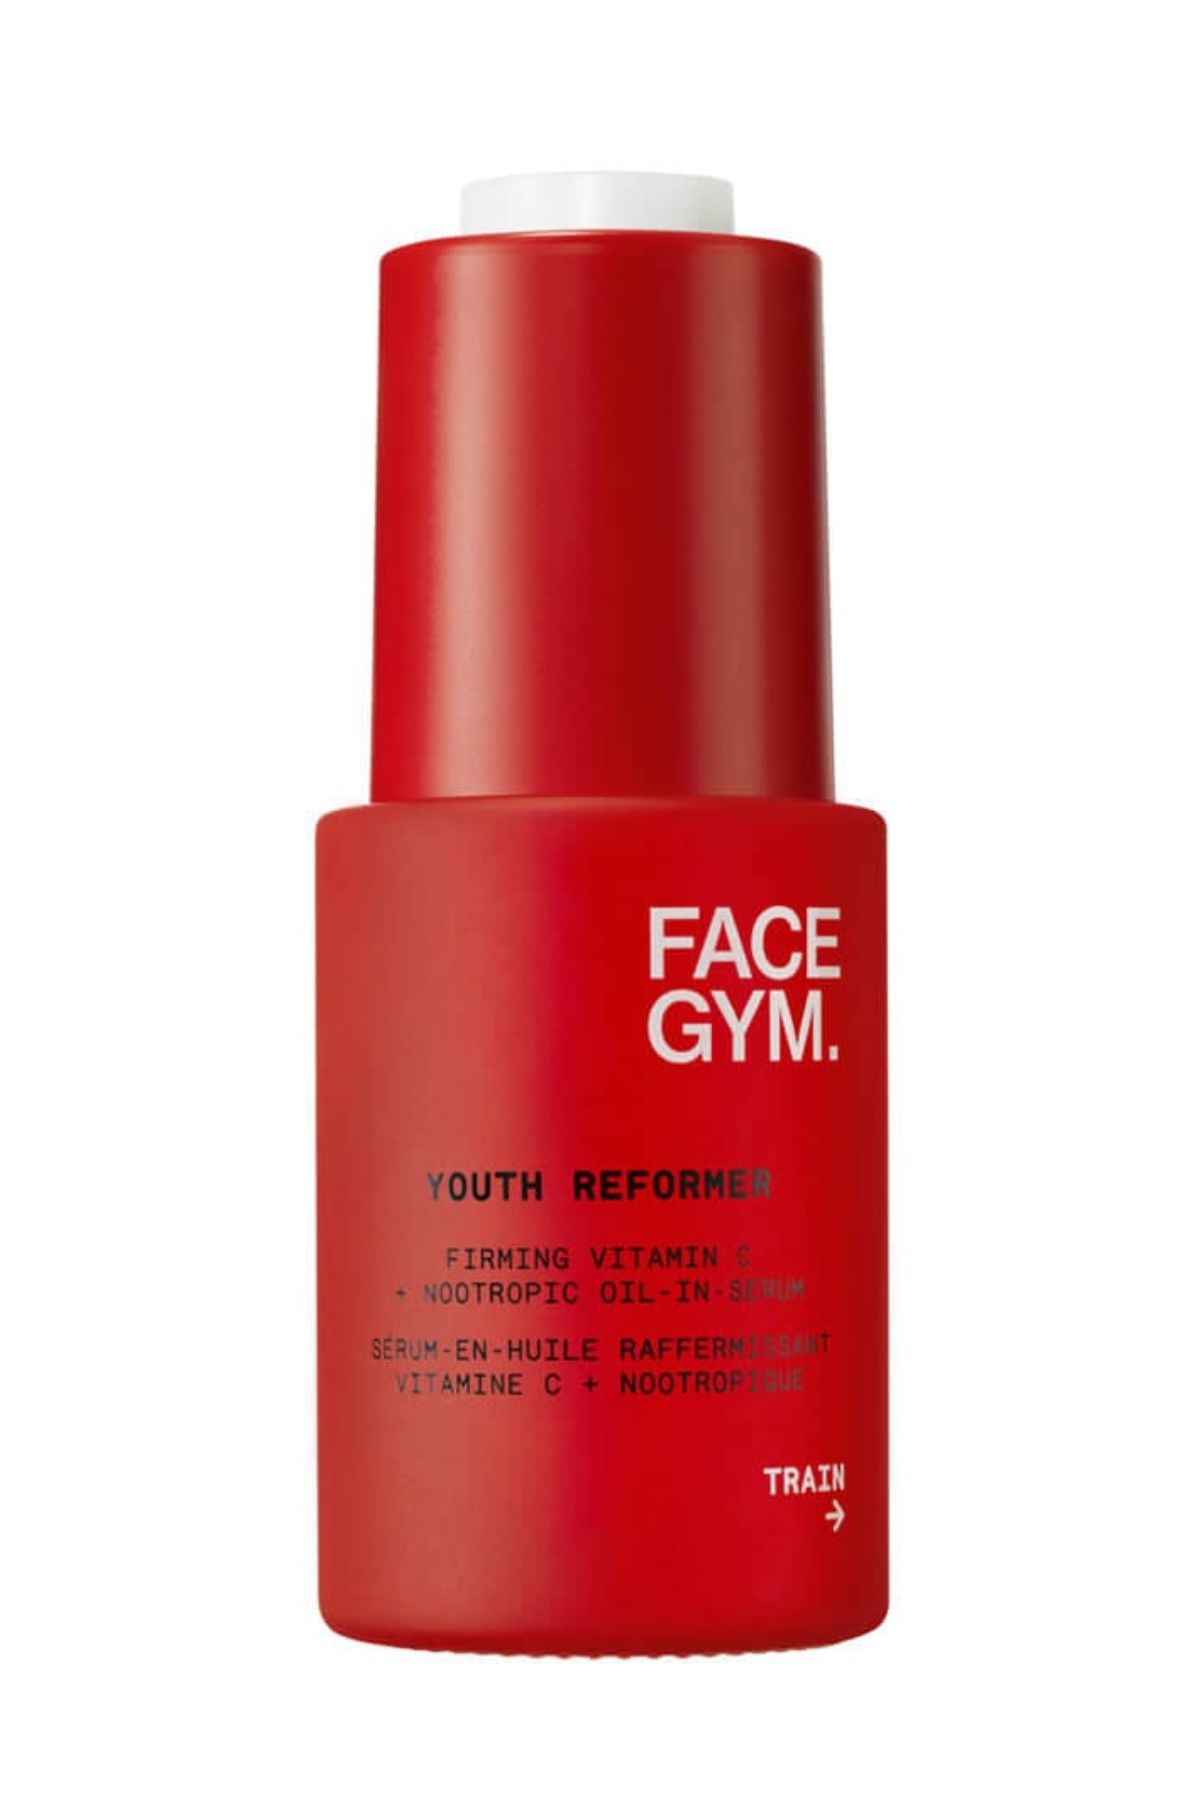 FaceGym, Youth Reformer Firming Vitamin C Oil Serum ($148)